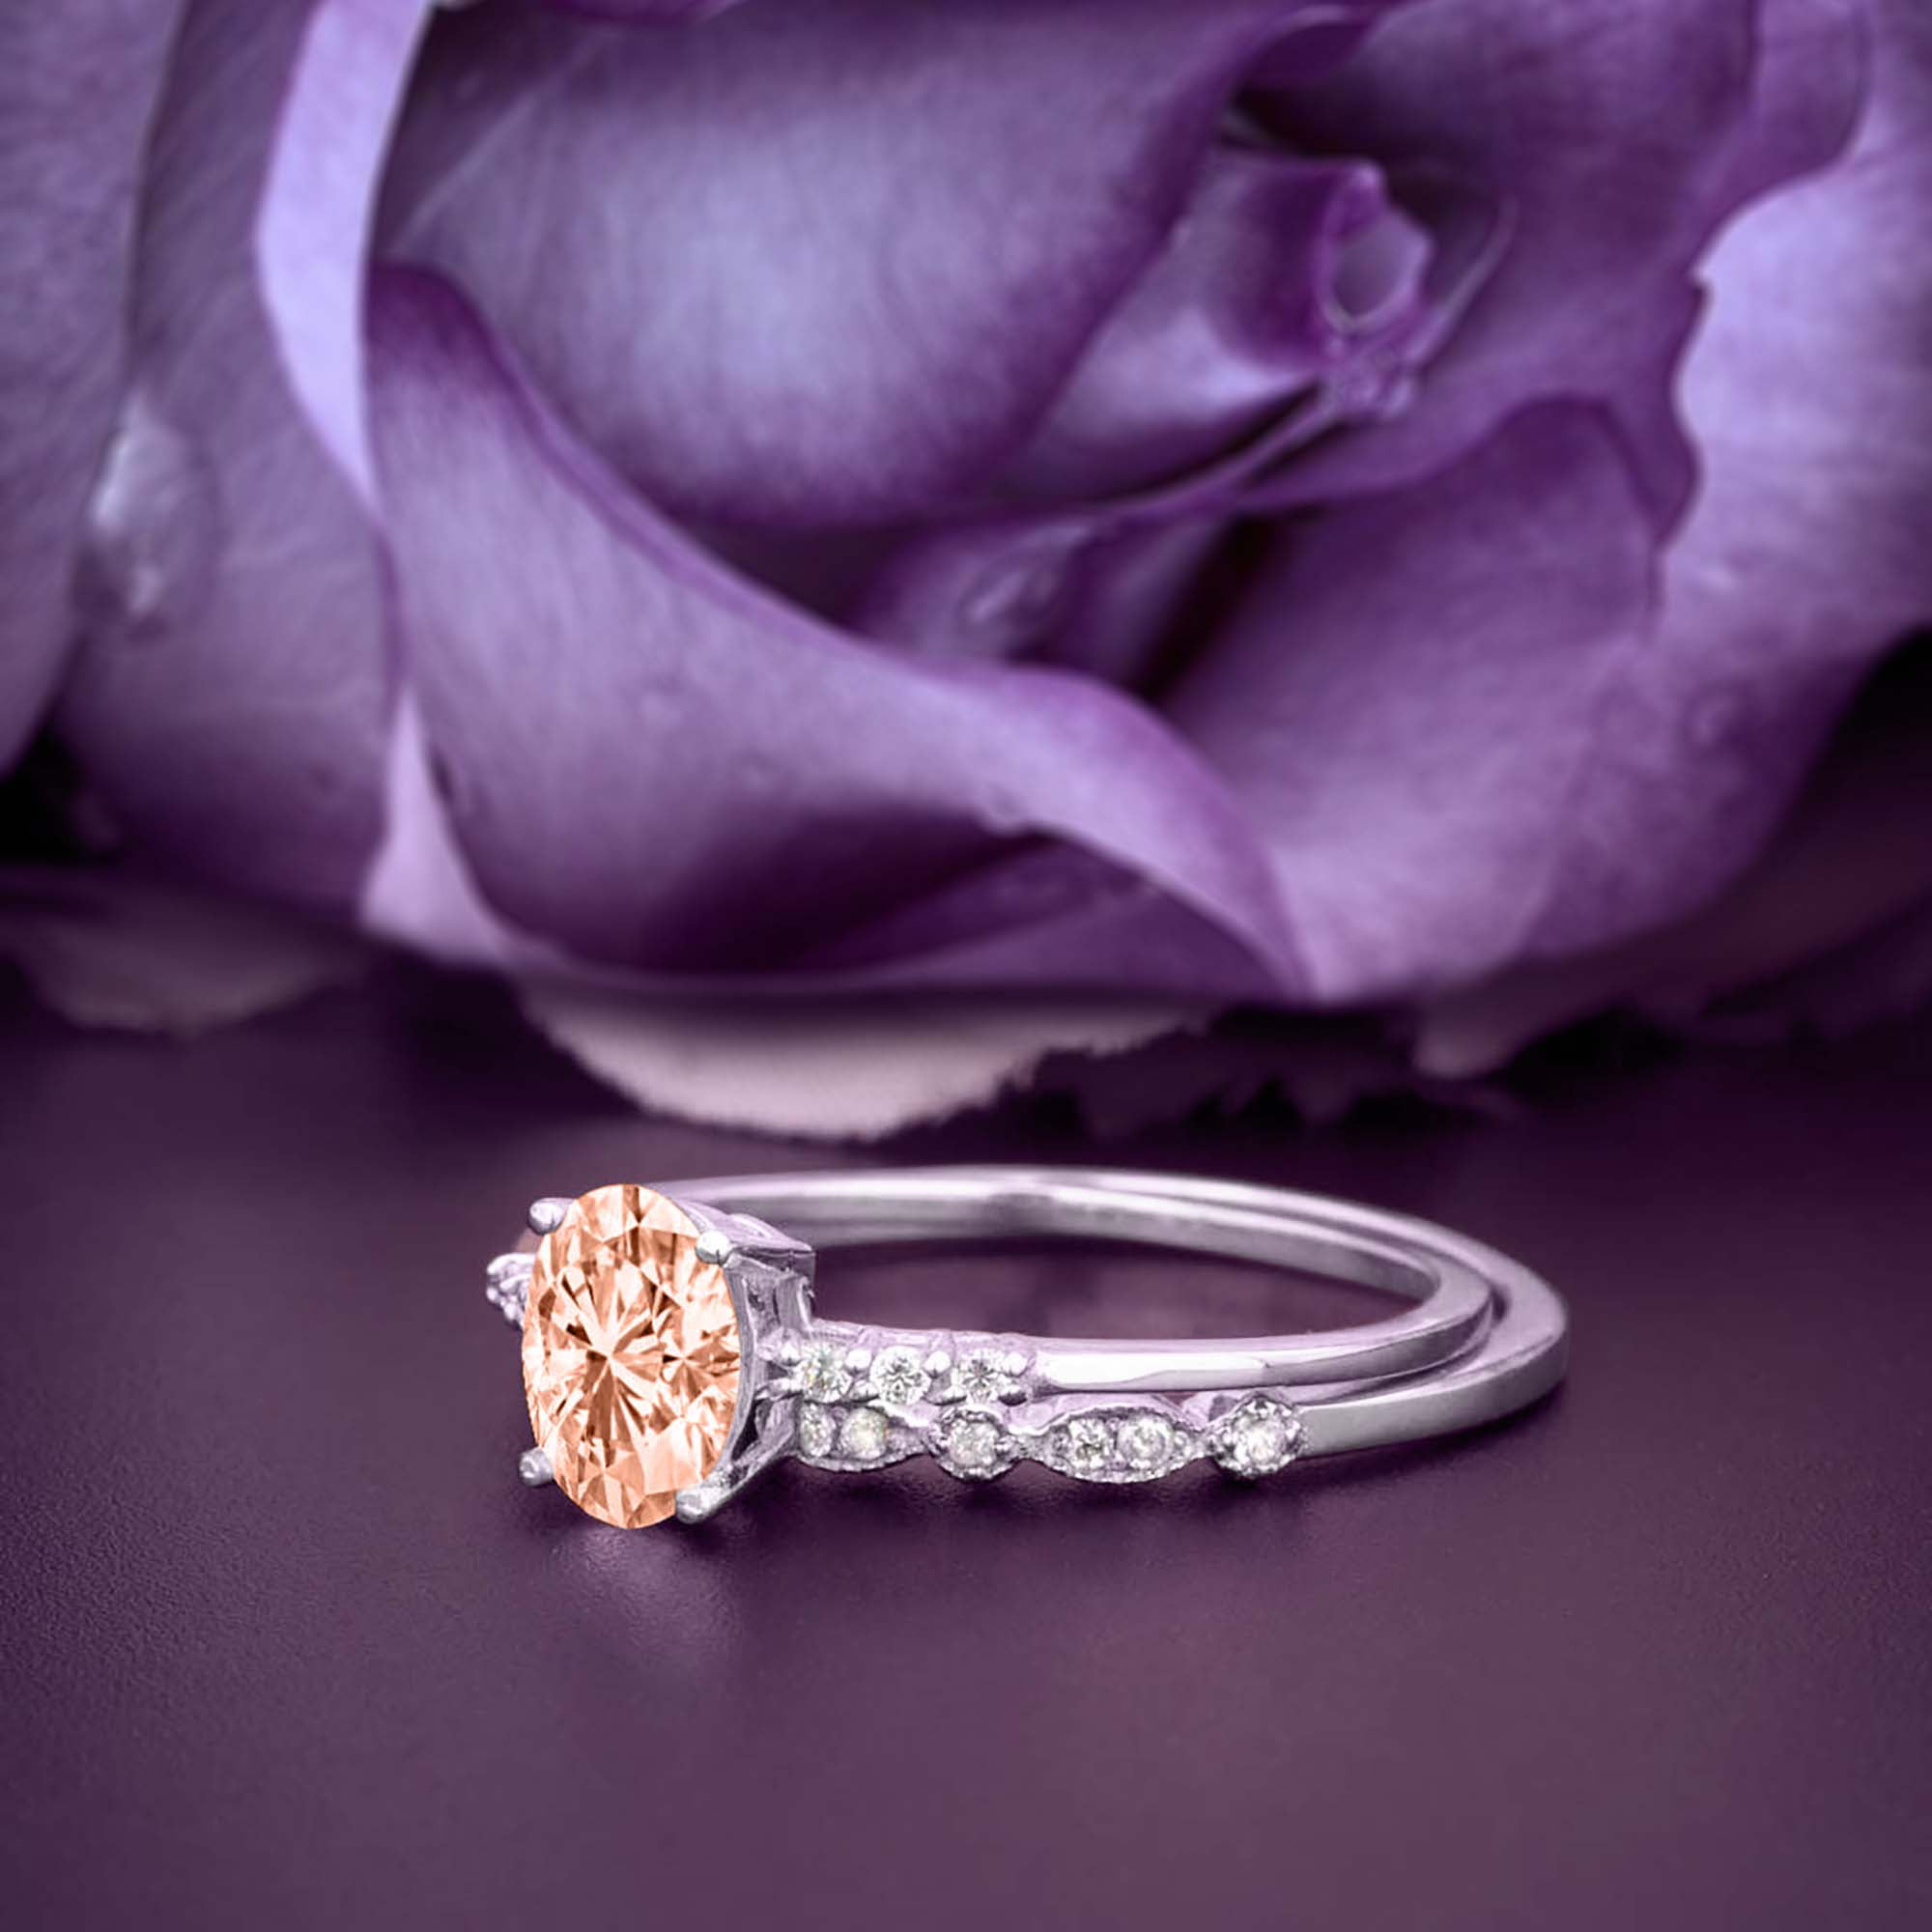 Vintage moissanite engagement ring,18k rose gold oval cut ring,Art deco ring,wedding woman Unique ring,Anniversary ring for her,Promise ring